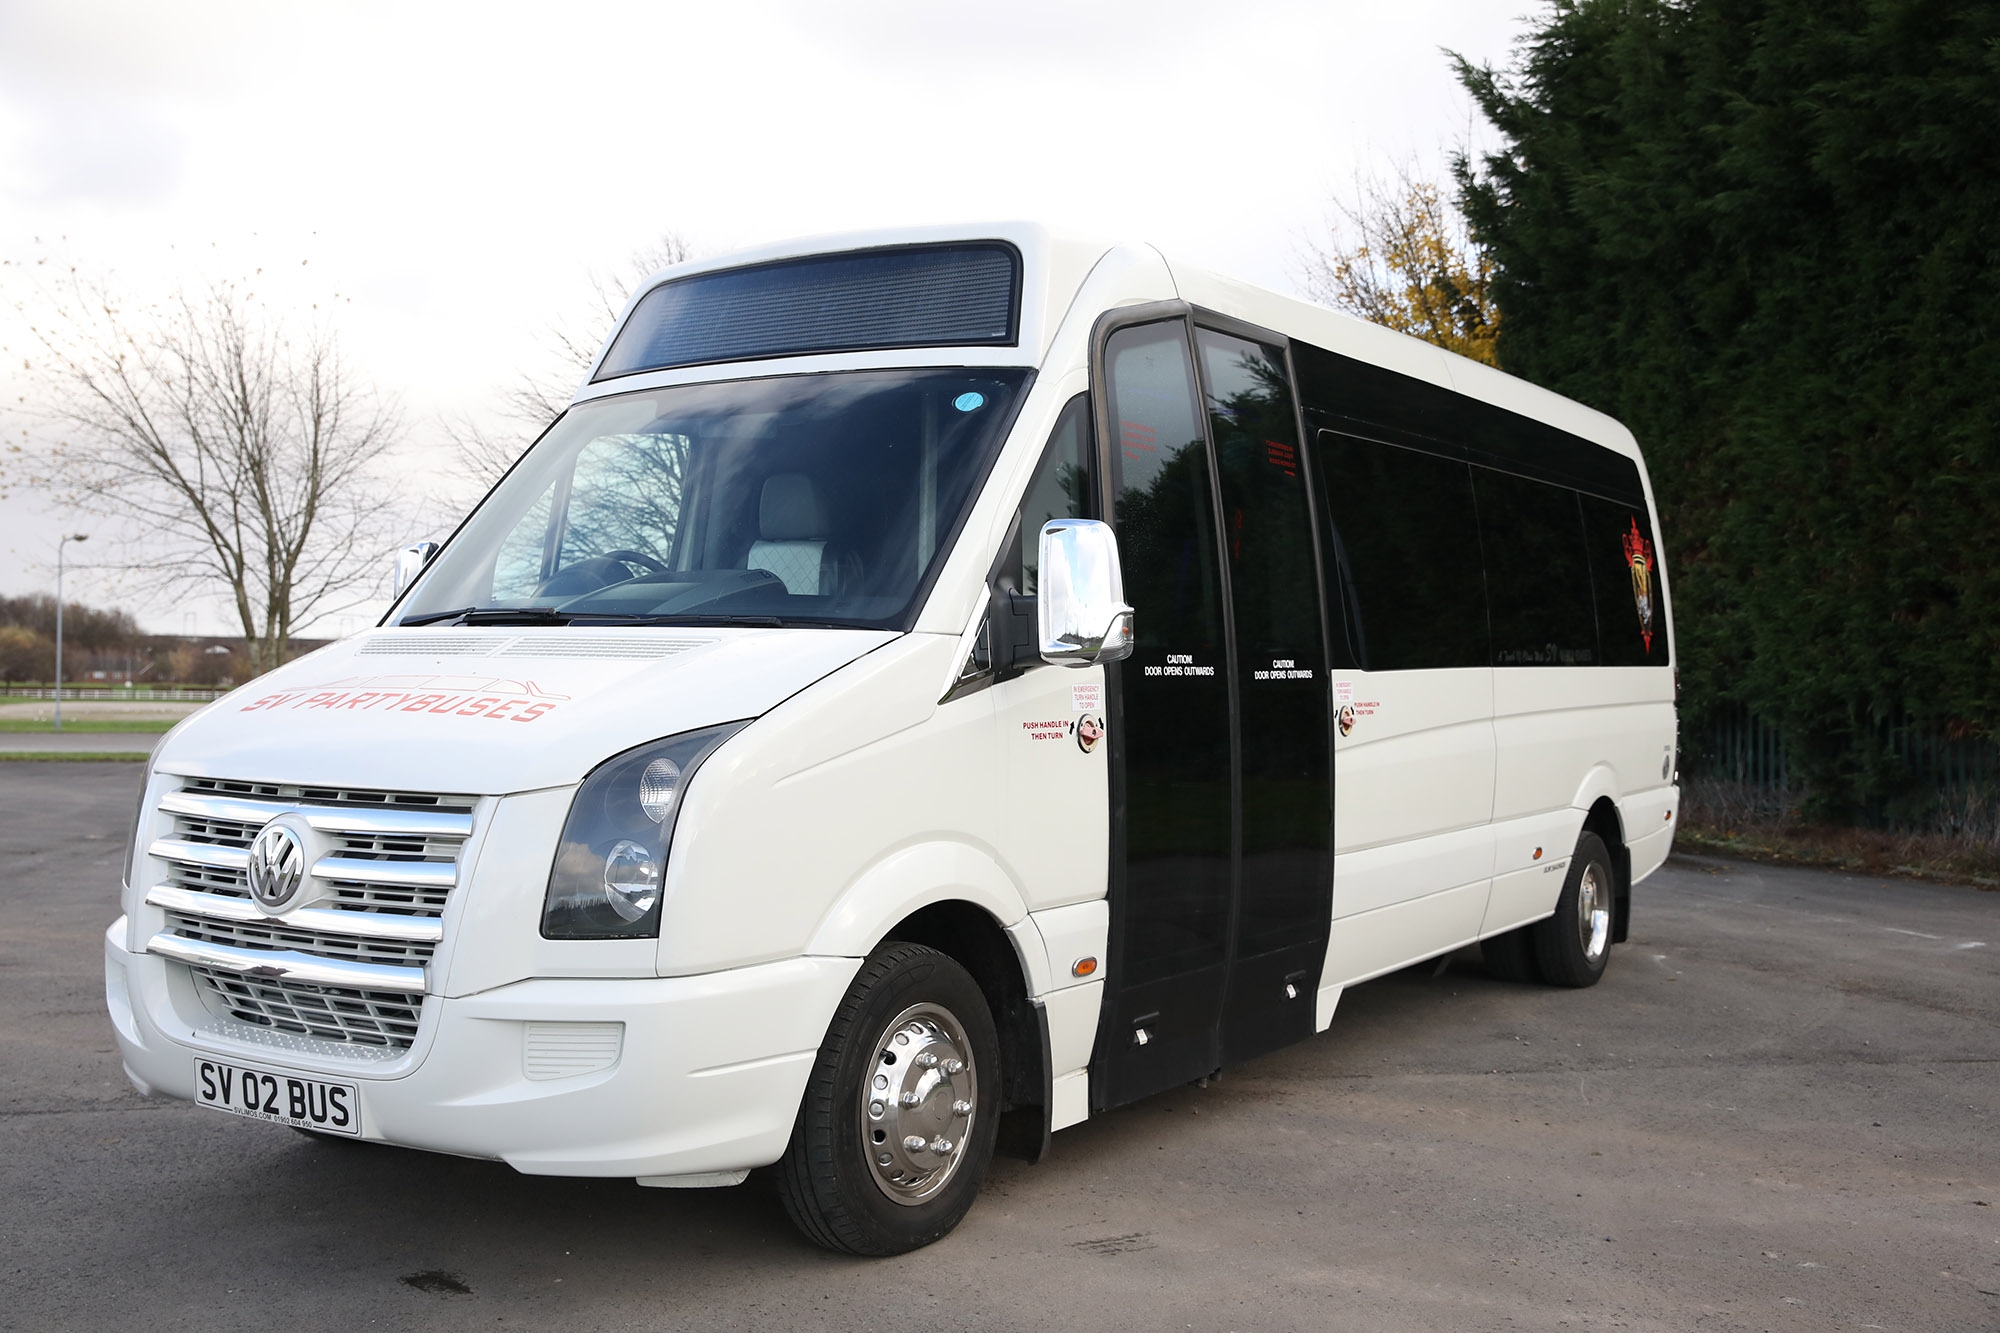 Maximising Fun on the Road: Top Features to Look for in a UK Party Bus Hire